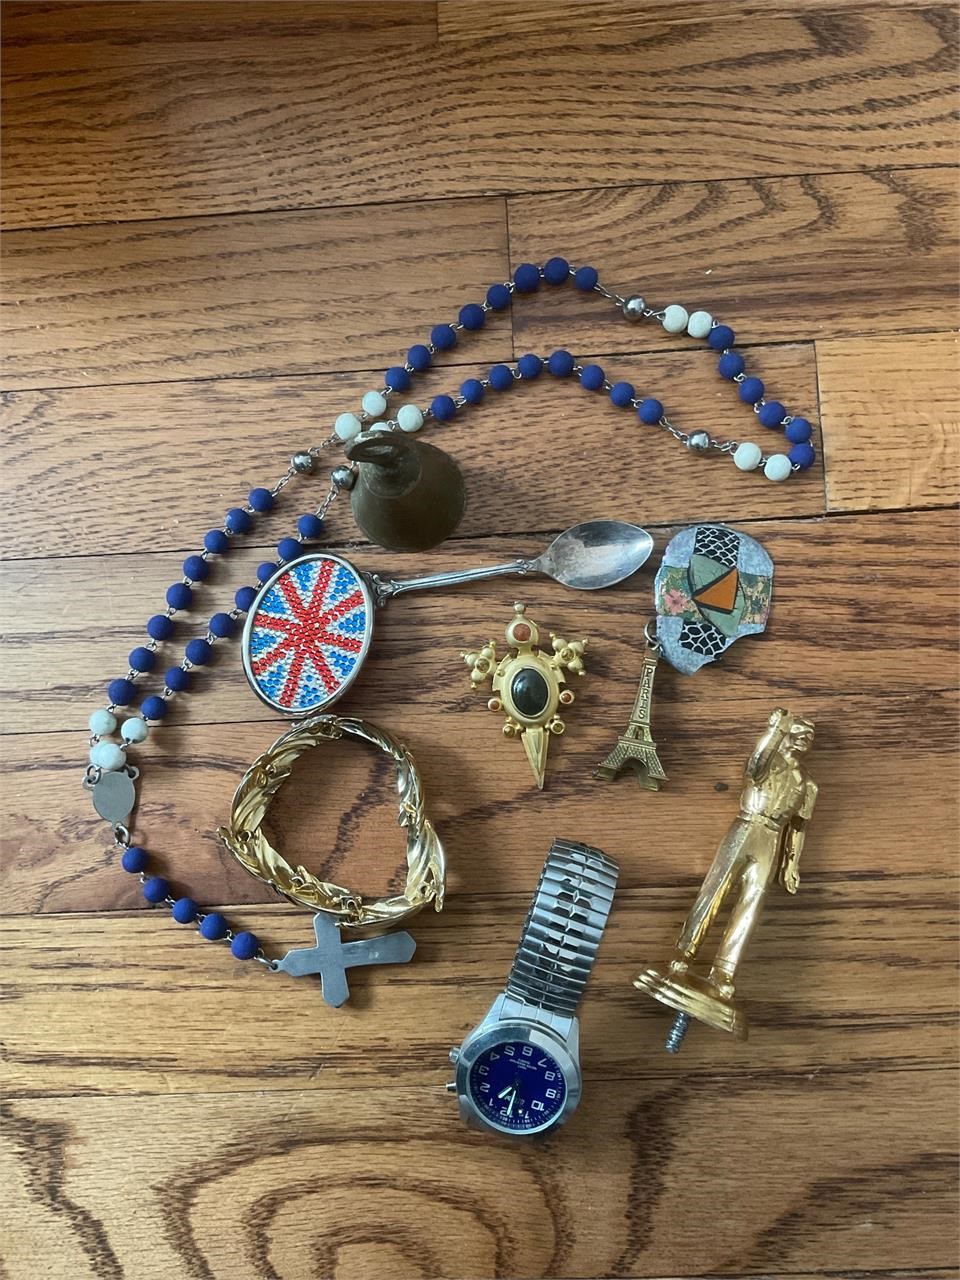 Nate’s estate and collectable auction (mixed items)